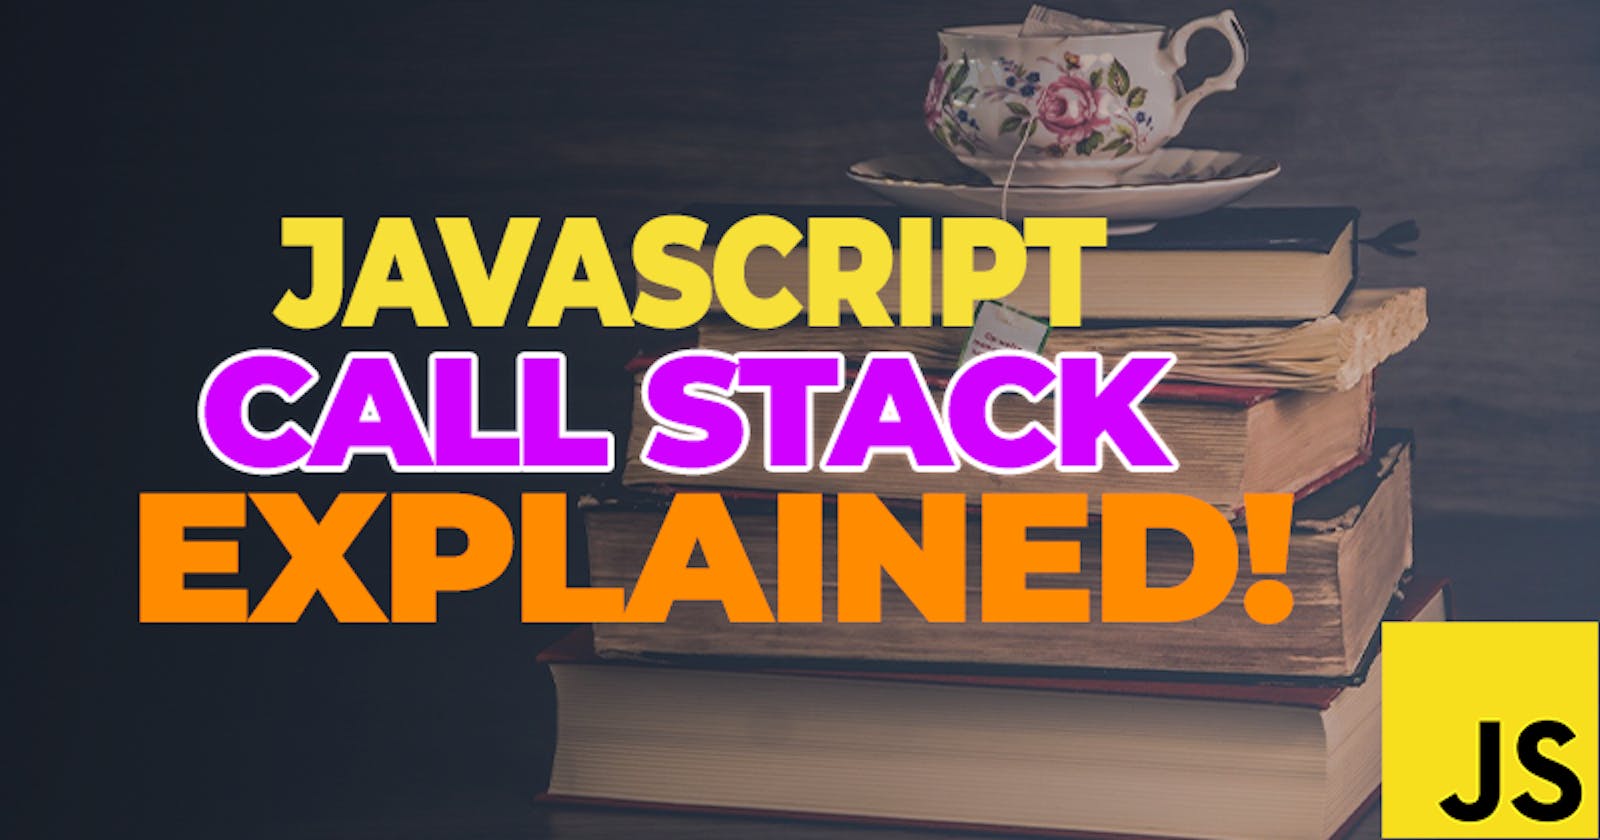 JavaScript Call Stack Explained!